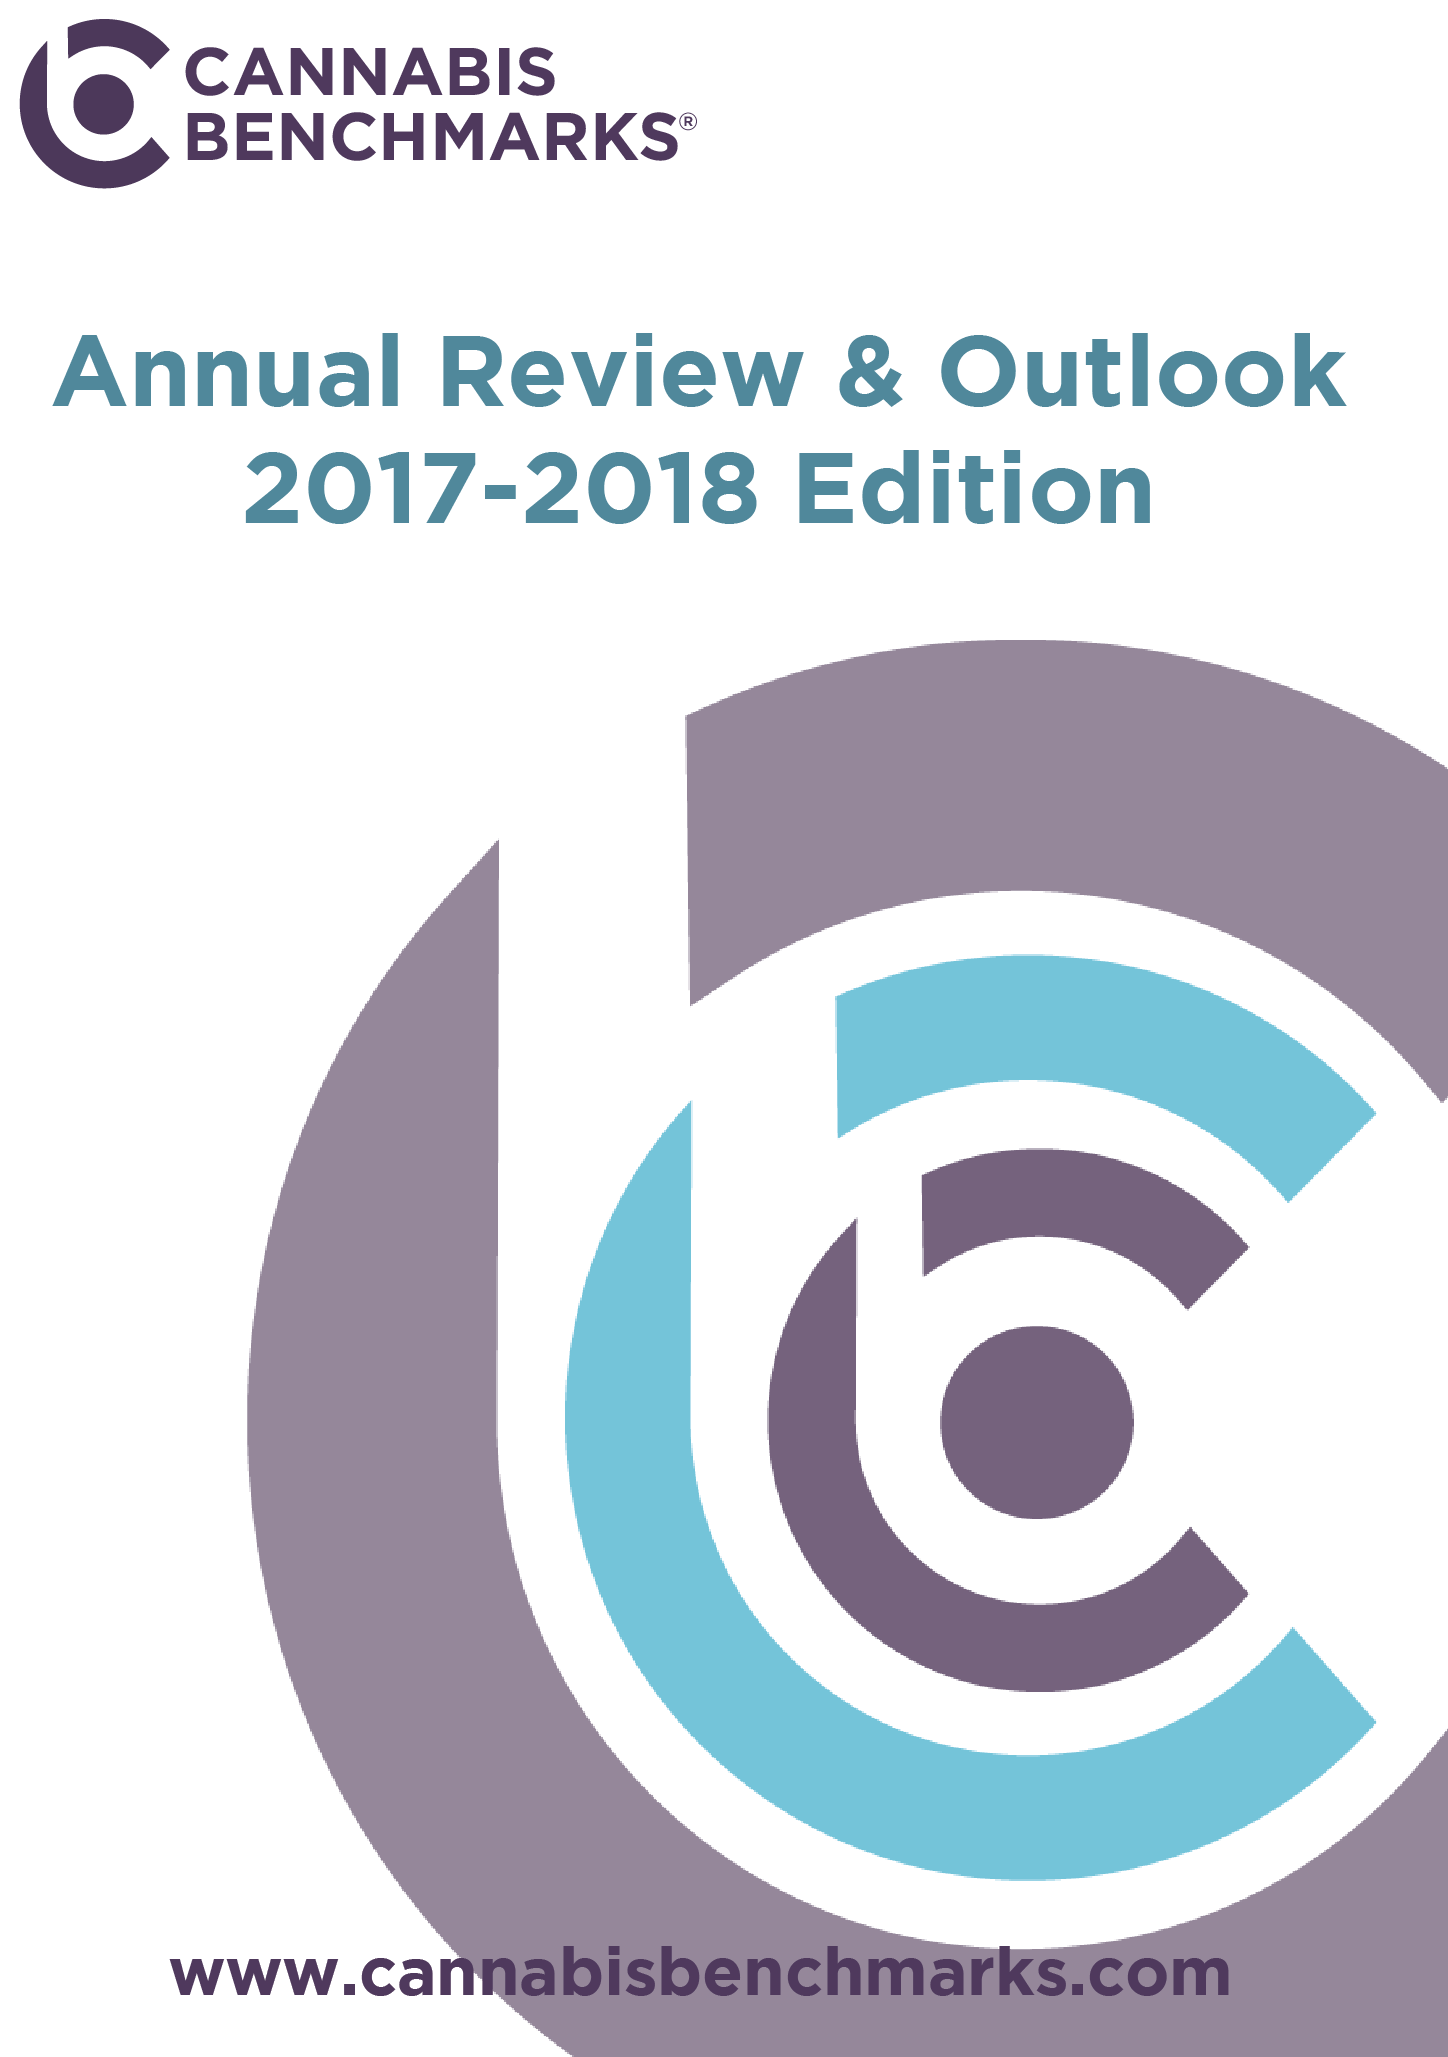 Cannabis Benchmarks Annual Review And Outlook: 2017-2018 Edition